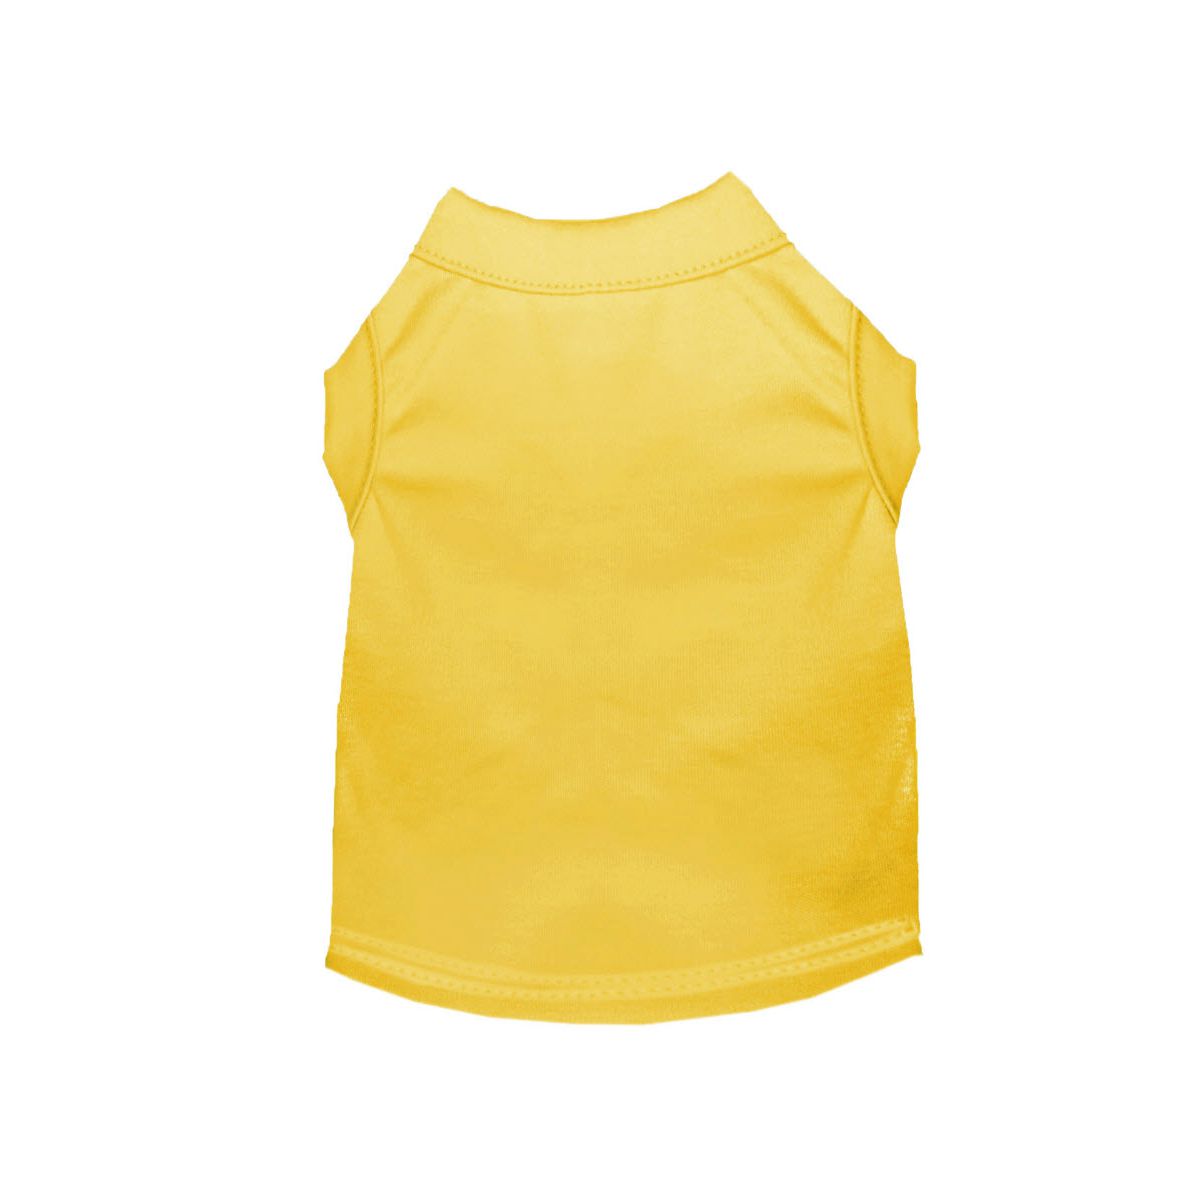 Cotton Blend Tee Shirt in Yellow | Pawlicious & Company